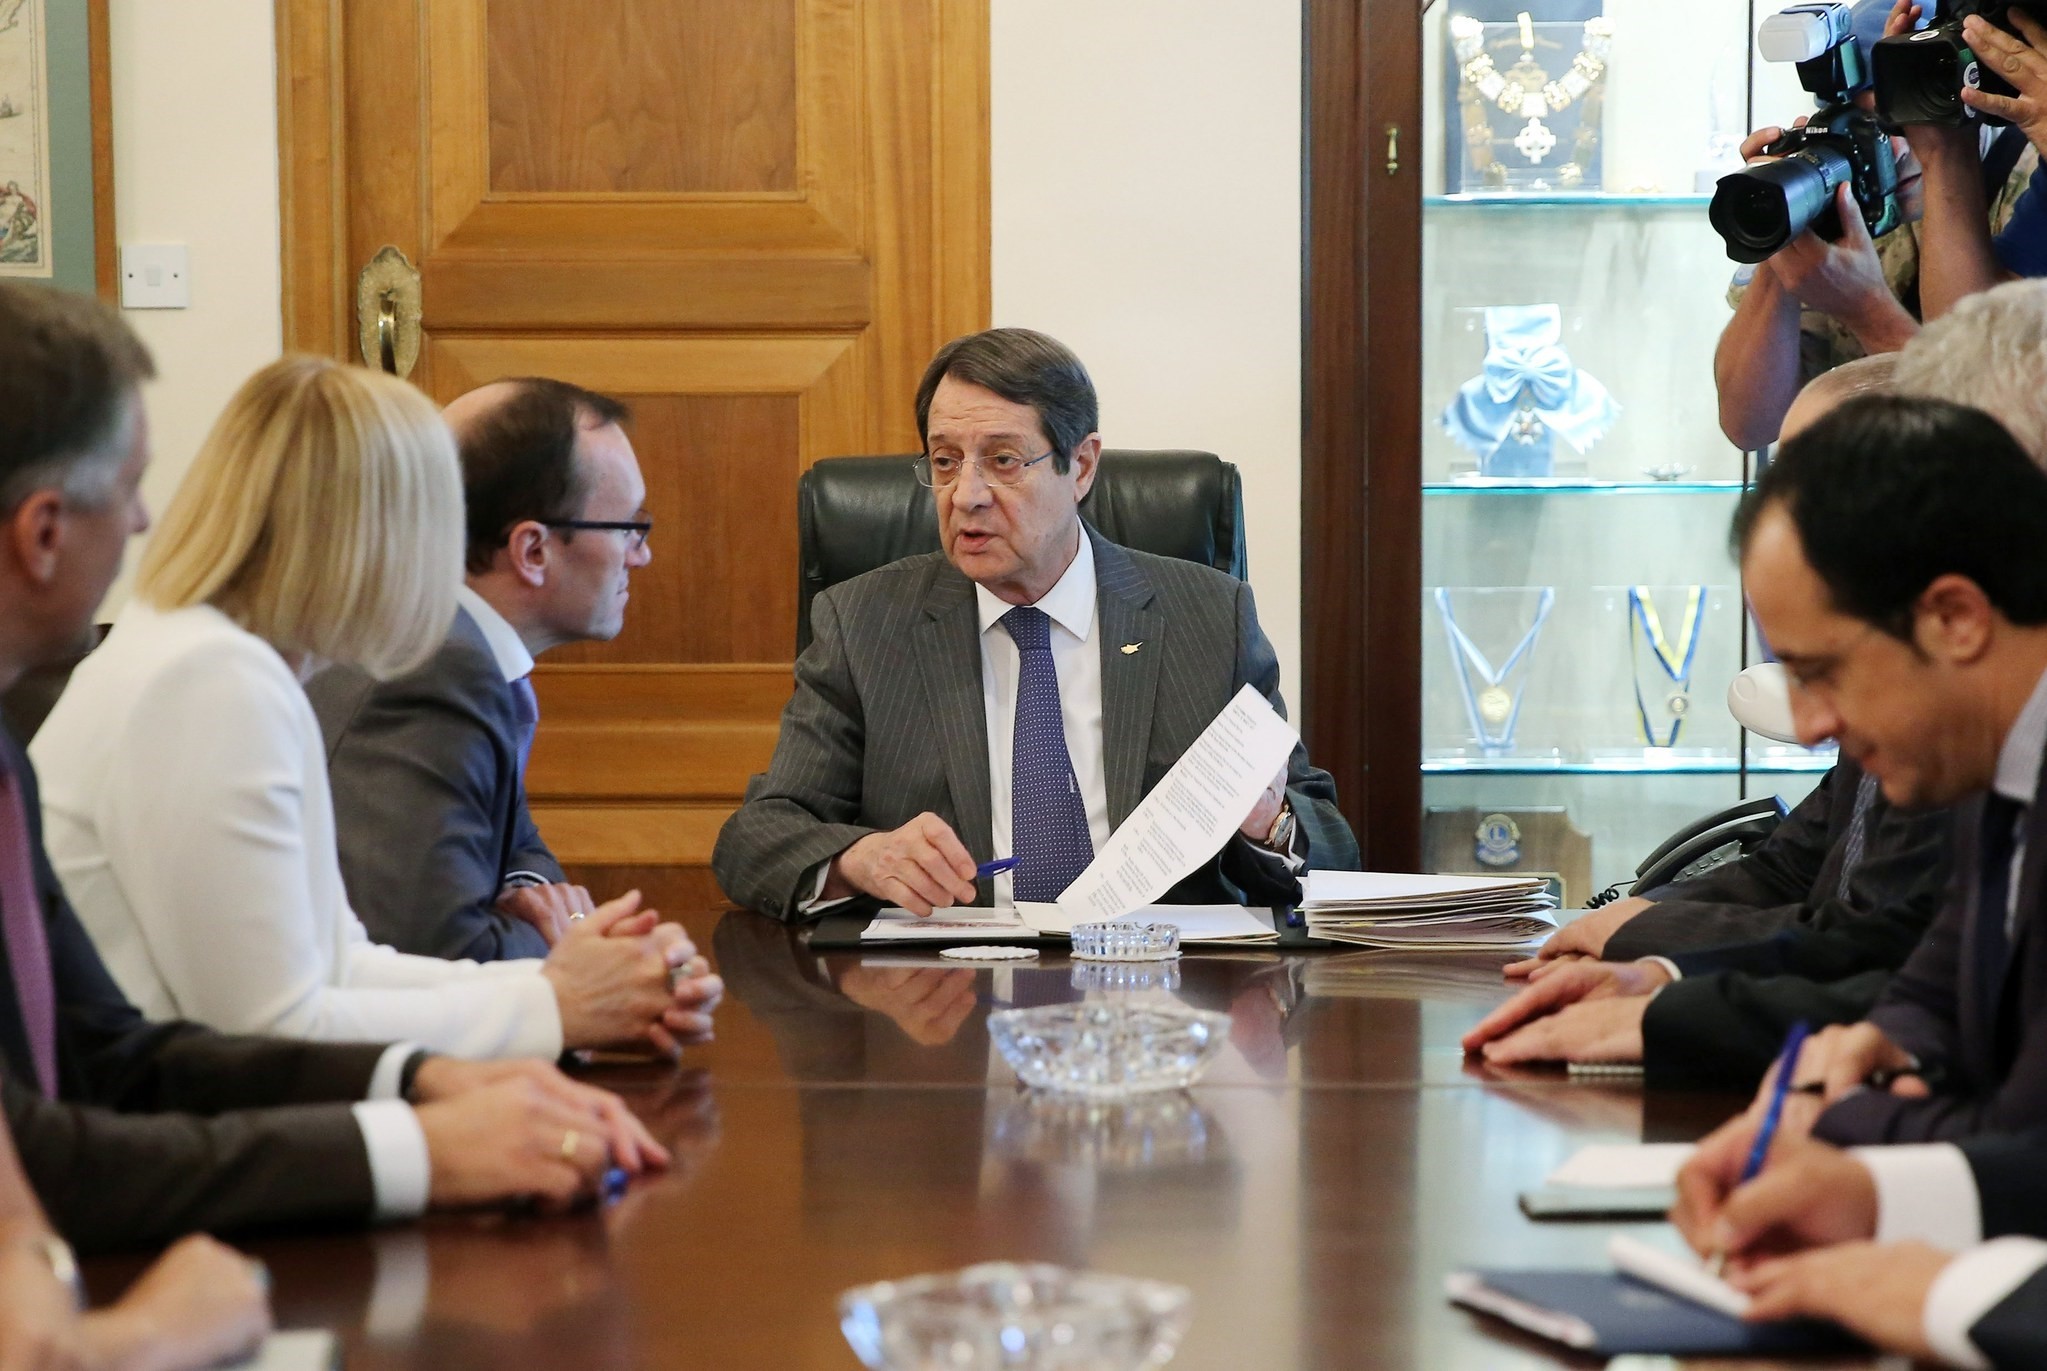 Greek Cypriot leader Nicos Anastasiades talks with Special Advisor to the UN Secretary-General on Cyprus, Espen Barth Eide, during their meeting at the Presidential Palace in Nicosia, Cyprus, 25 May 2017.